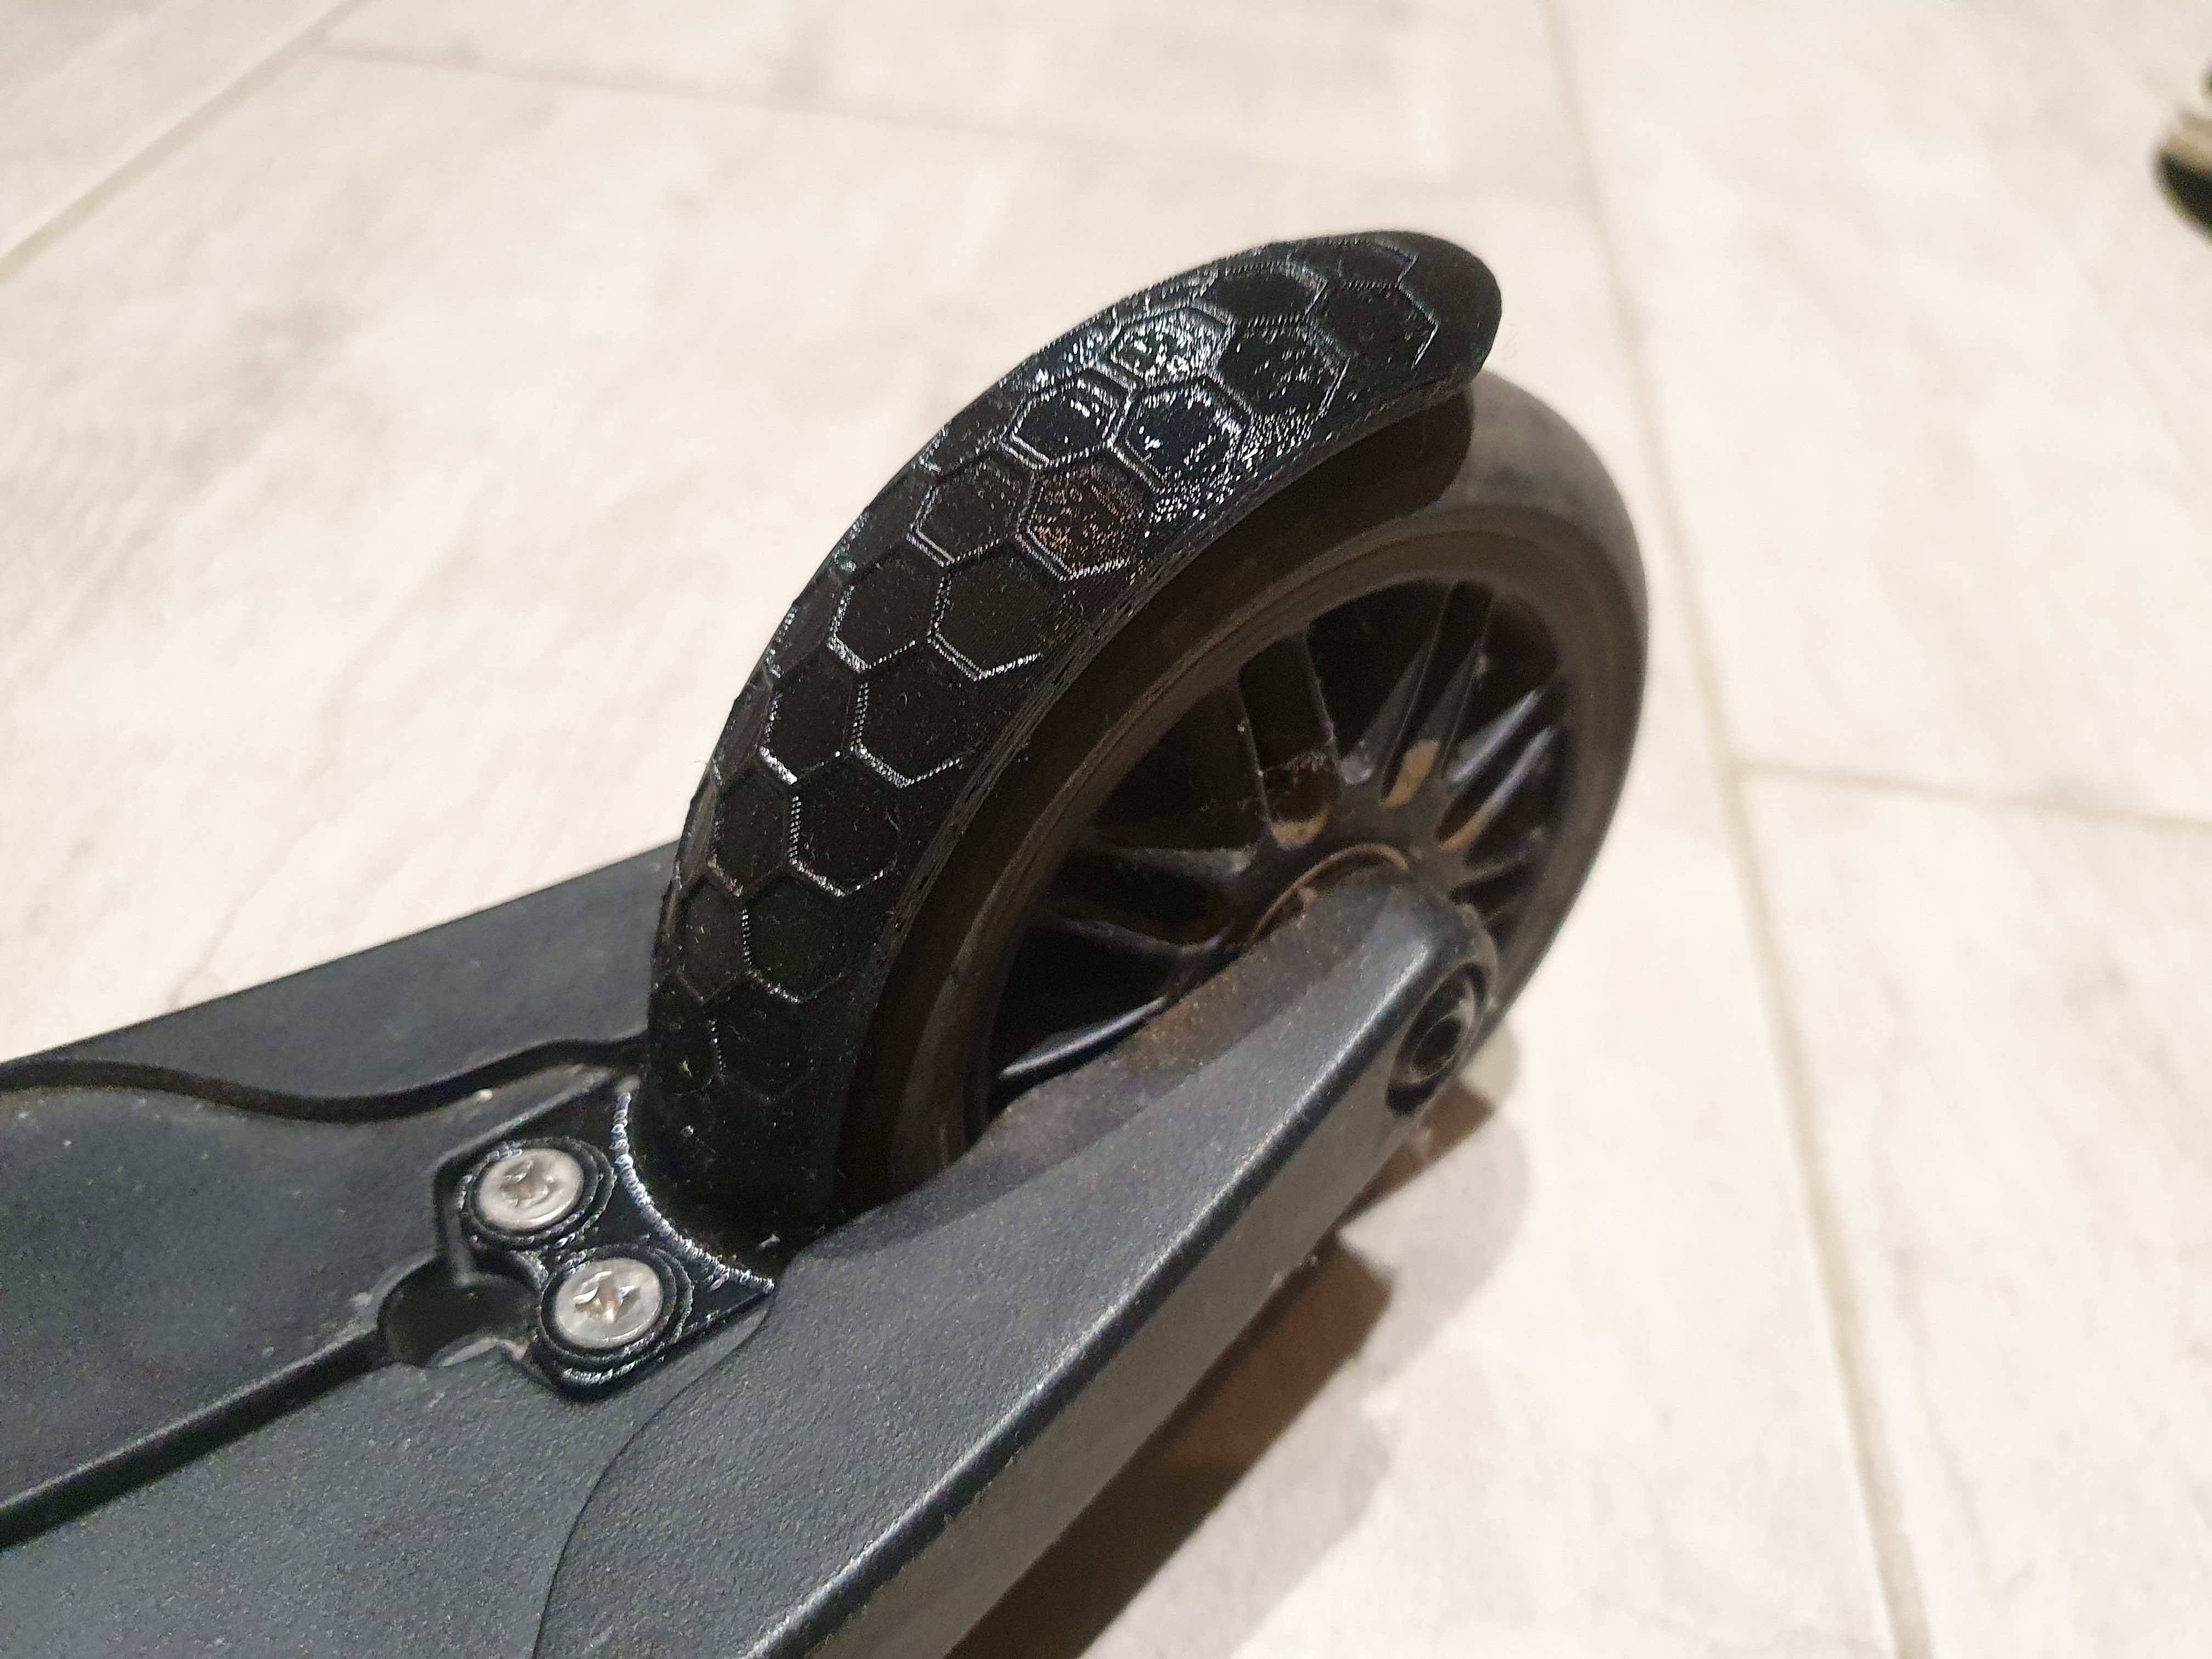 Decathlon Oxelo scooter - brake replacement